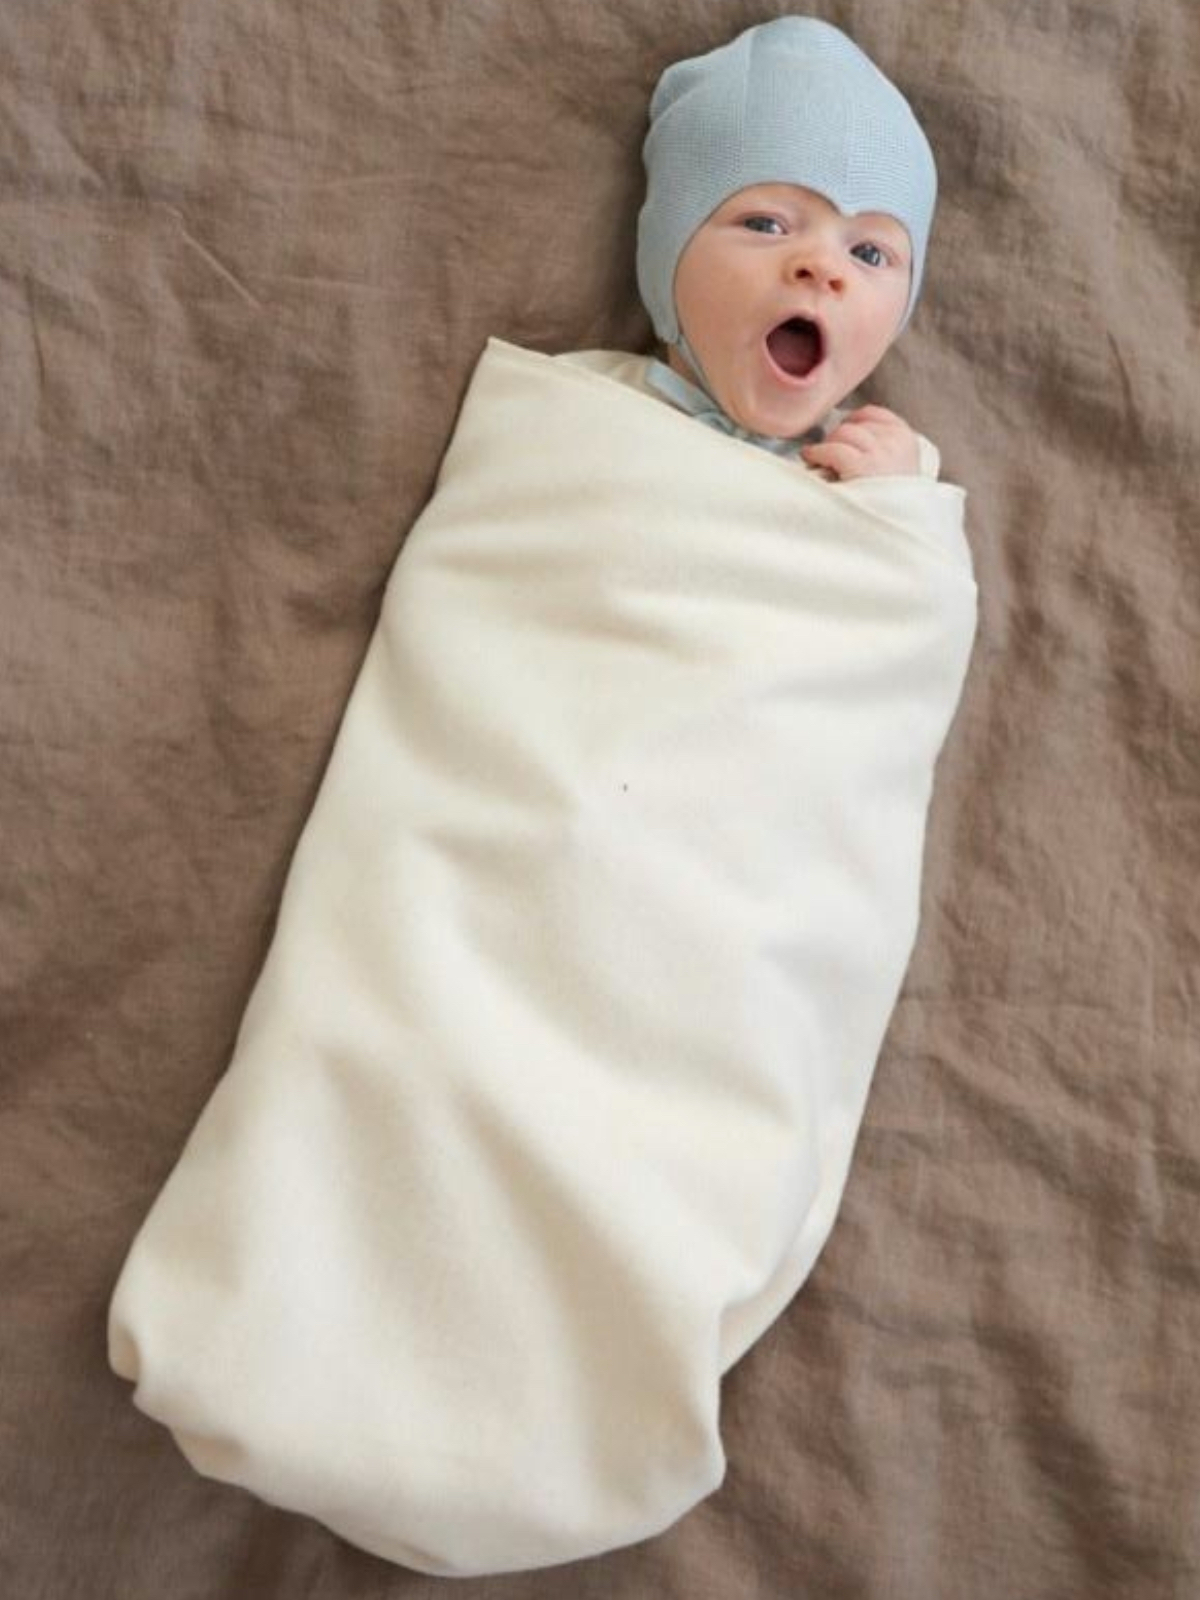 Ruskovilla's cotton swaddle cloth for babies